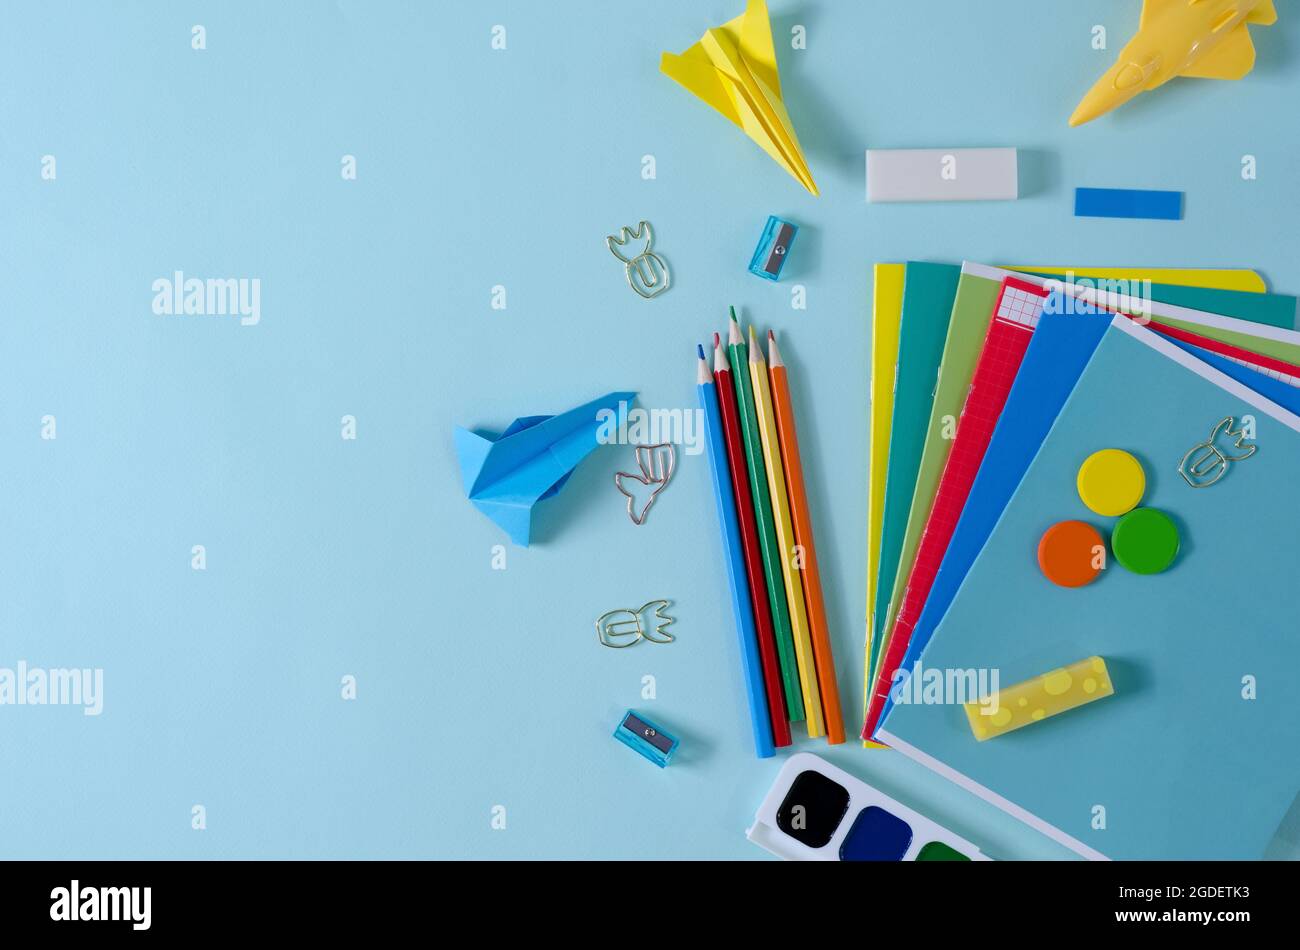 Notebooks, pencils, paints, sharpeners, paper clips - goods for school, office on a blue background Stock Photo